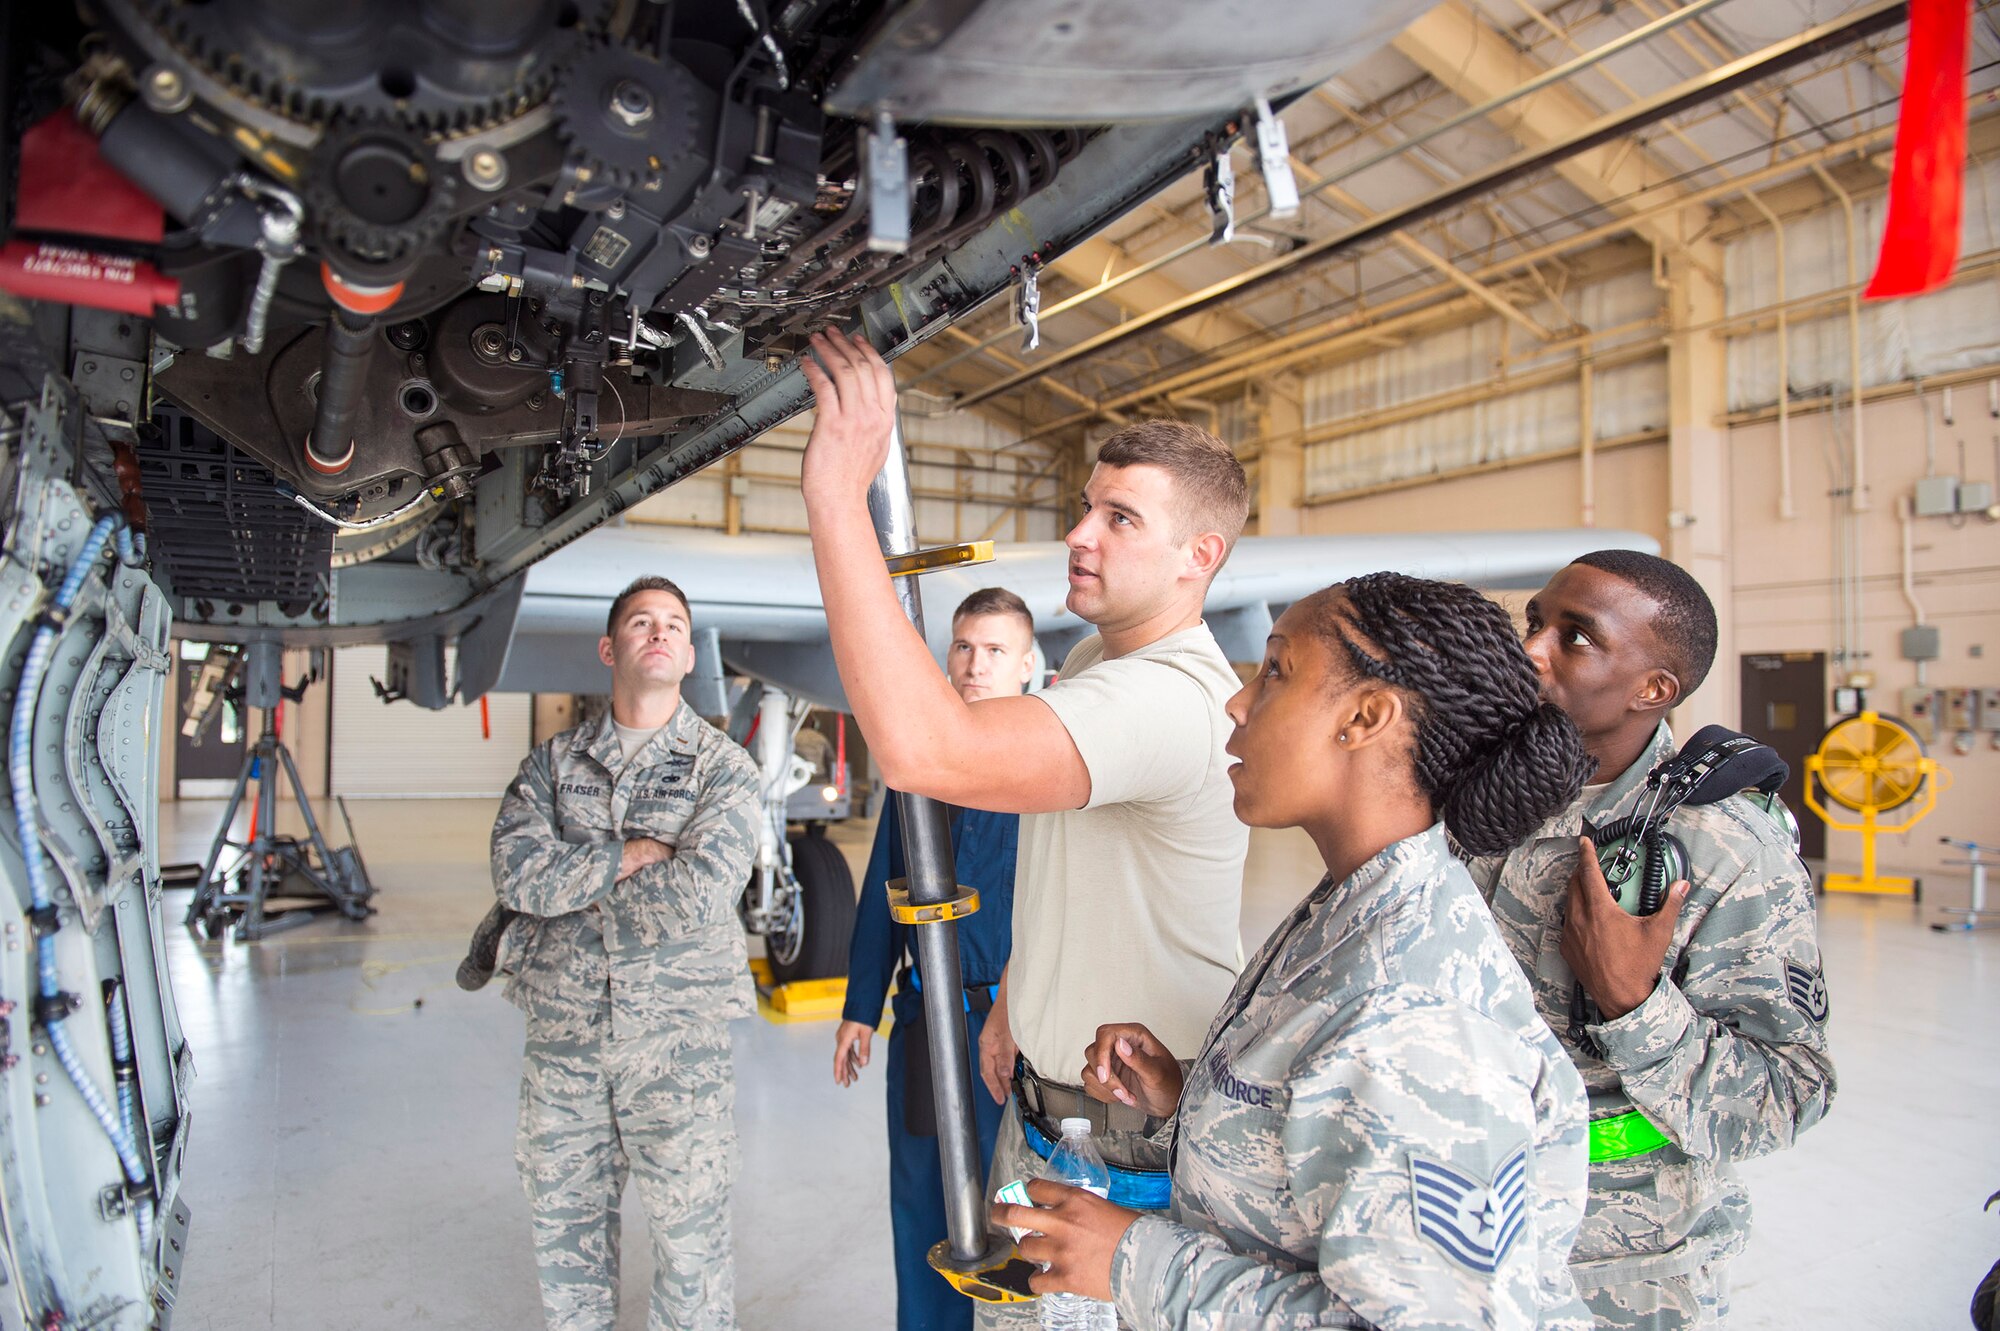 U.S. Air Force Senior Airman Joshua Abbott, 74th Aircraft Maintenance Unit aircraft armament systems technician, explains to Tech. Sgt. Netasha Hutto-Harris, 23d Medical Support Squadron NCO in charge of medical evaluation boards, the weaponry aspects of an A-10C Thunderbolt II, Oct. 6, 2016, at Moody Air Force Base, Ga. Hutto-Harris says she appreciated the chance to glimpse into the life of a maintainer. (U.S. Air Force photo by Airman 1st Class Greg Nash)